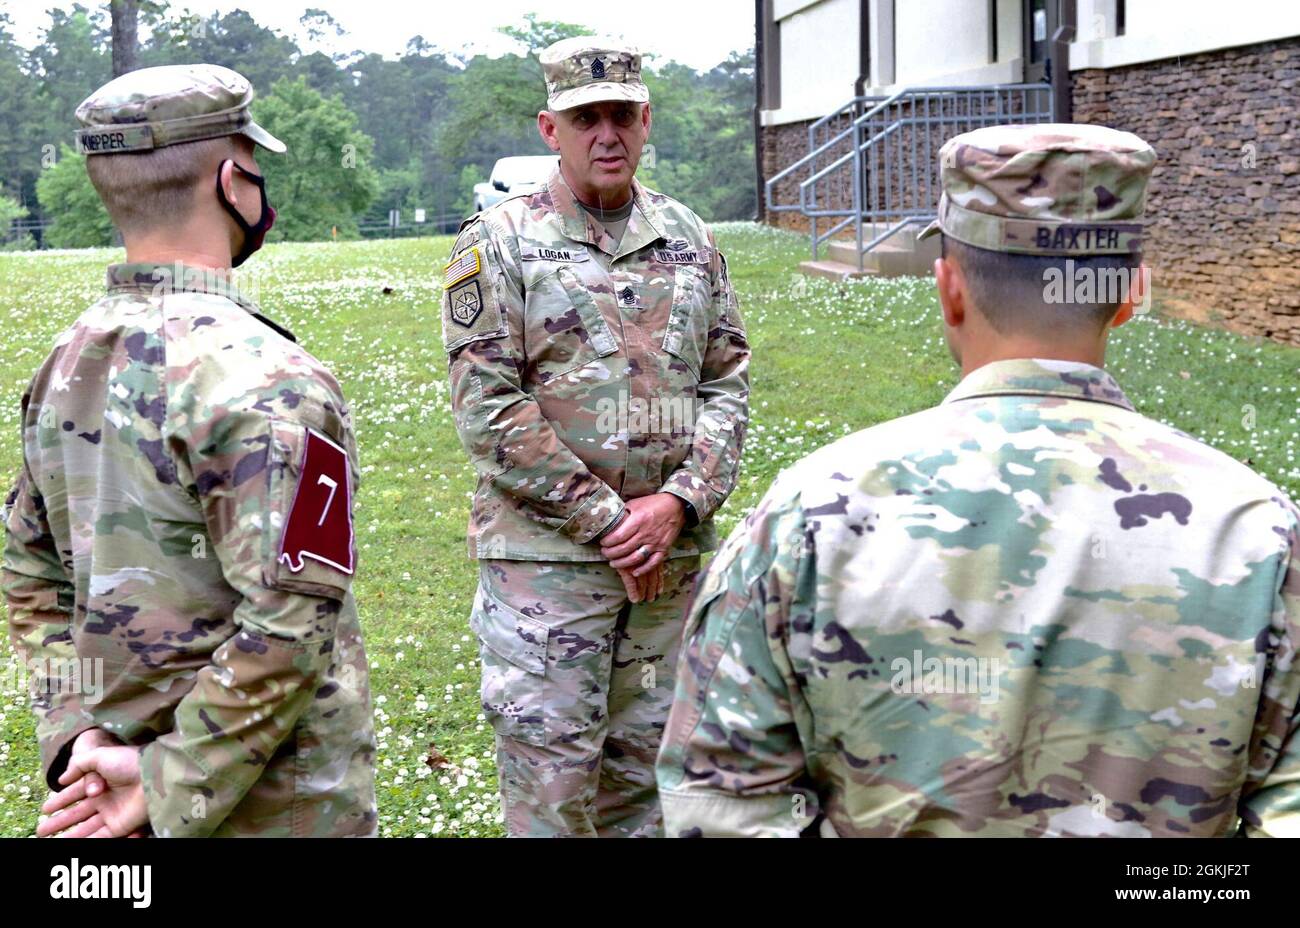 U.S. Army Command Sgt. Maj. Jeff Logan, the state command sergeant major of the Georgia Army National Guard, gives encouraging words to Spc. Brant Kiepper (left) and Sgt. James Baxter (right) May 2, 2021, at Ft. McClellan, Alabama. Baxter and Kiepper, representing the state of Georgia, began their first day at the Region III Best Warrior Competition. Stock Photo